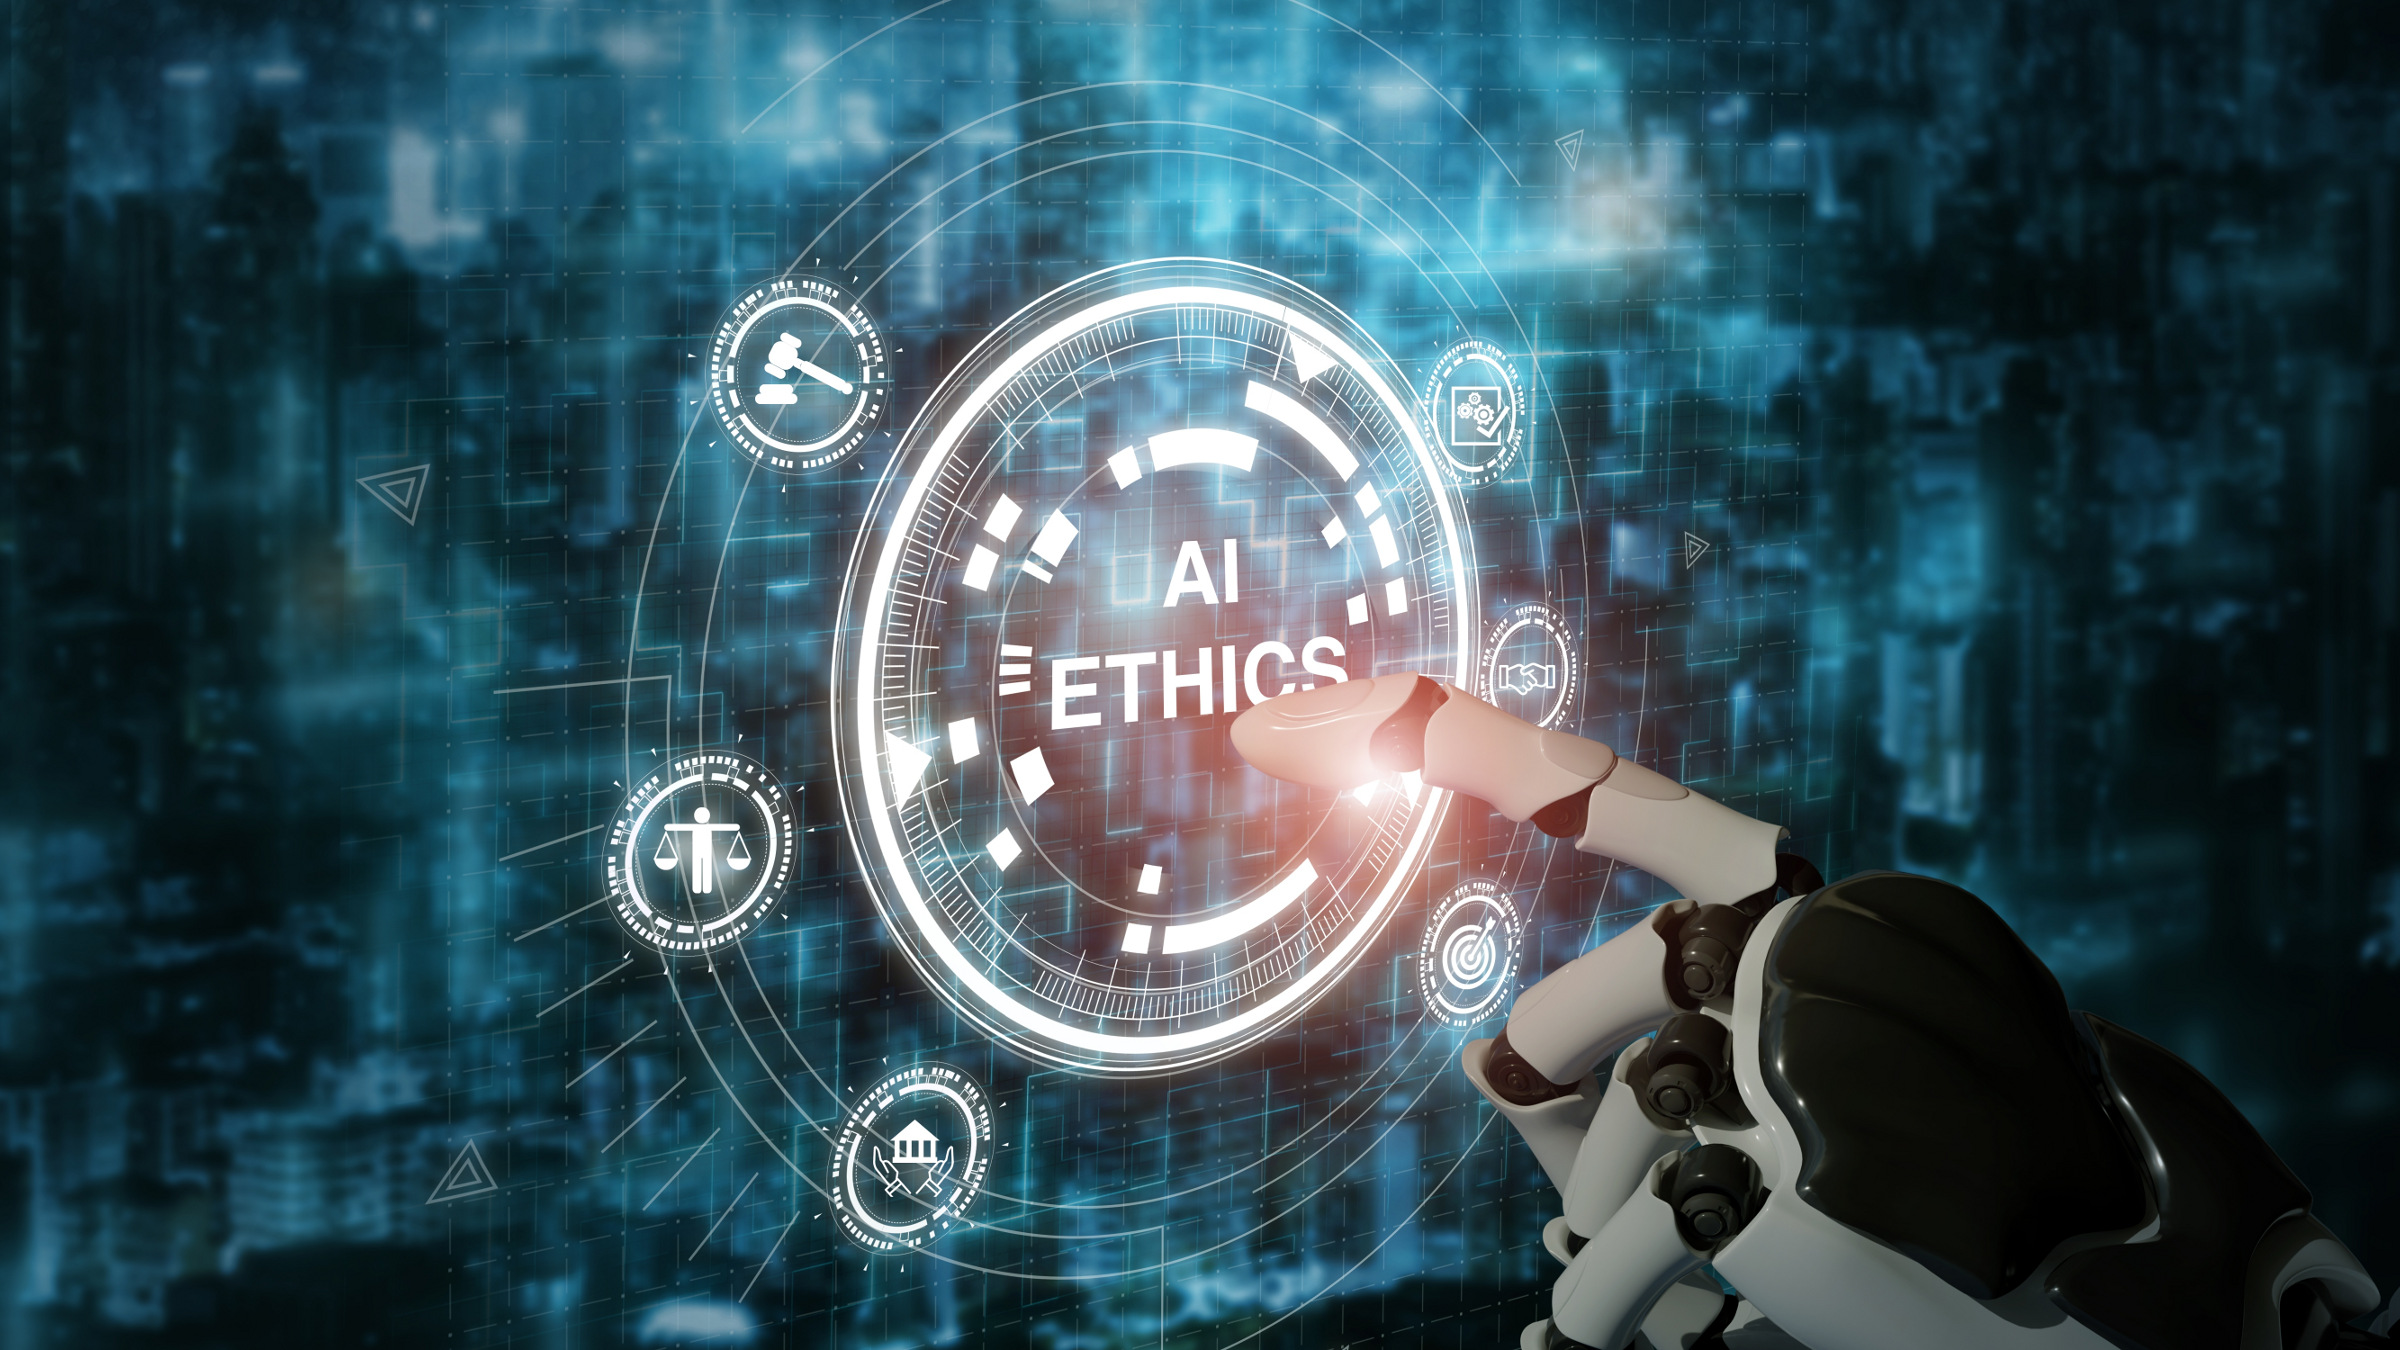 Credit: Shutterstock humanoid robotic hand points to 'AI Ethics' button, illustration